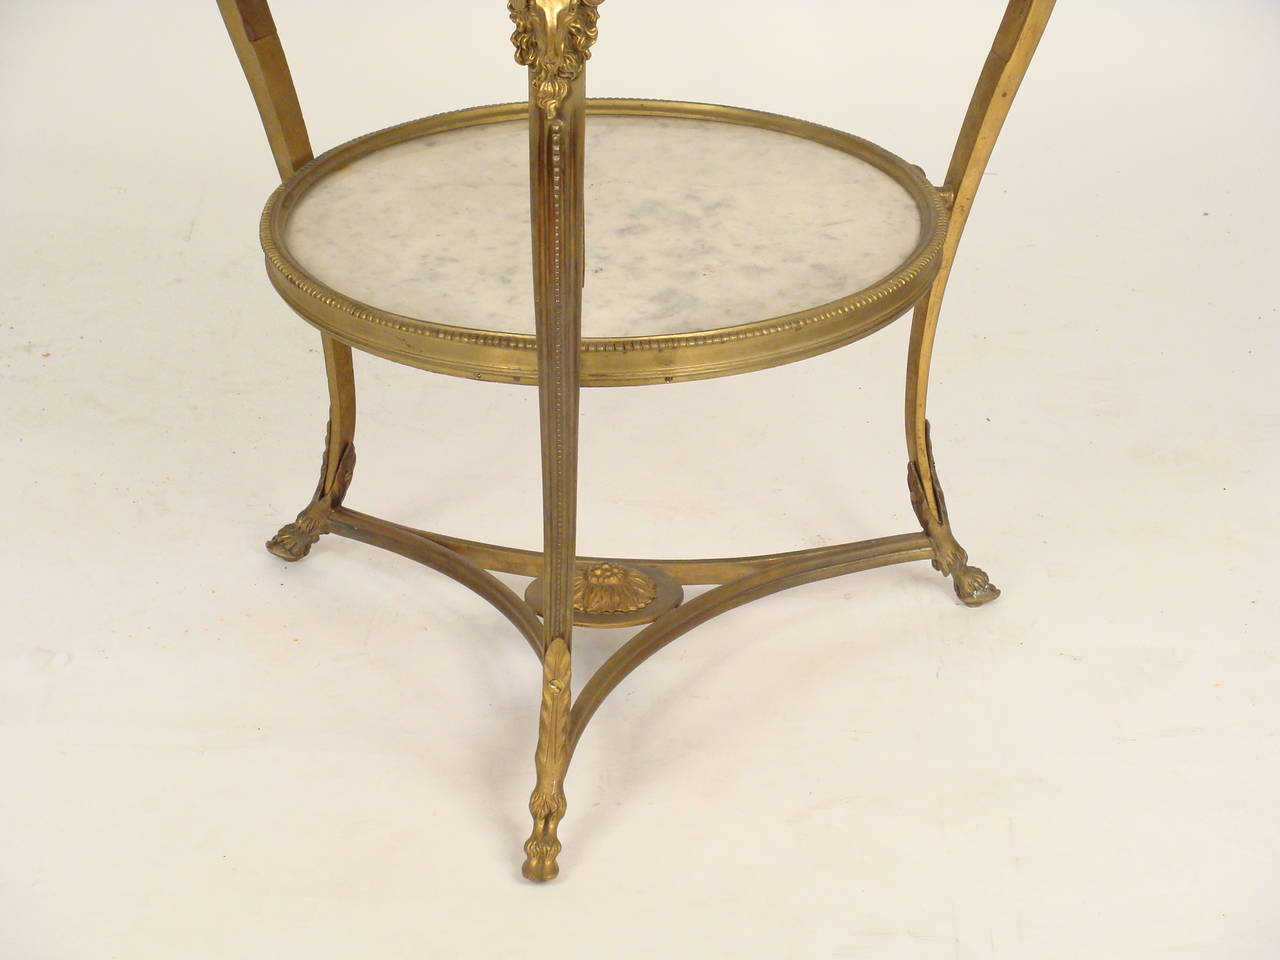 Directoire style gilt bronze and marble Gueridon, made circa 1970. This is a very stylish neoclassical table with a Carrara marble top, well defined ram head mounts on legs, resting on hoof feet.